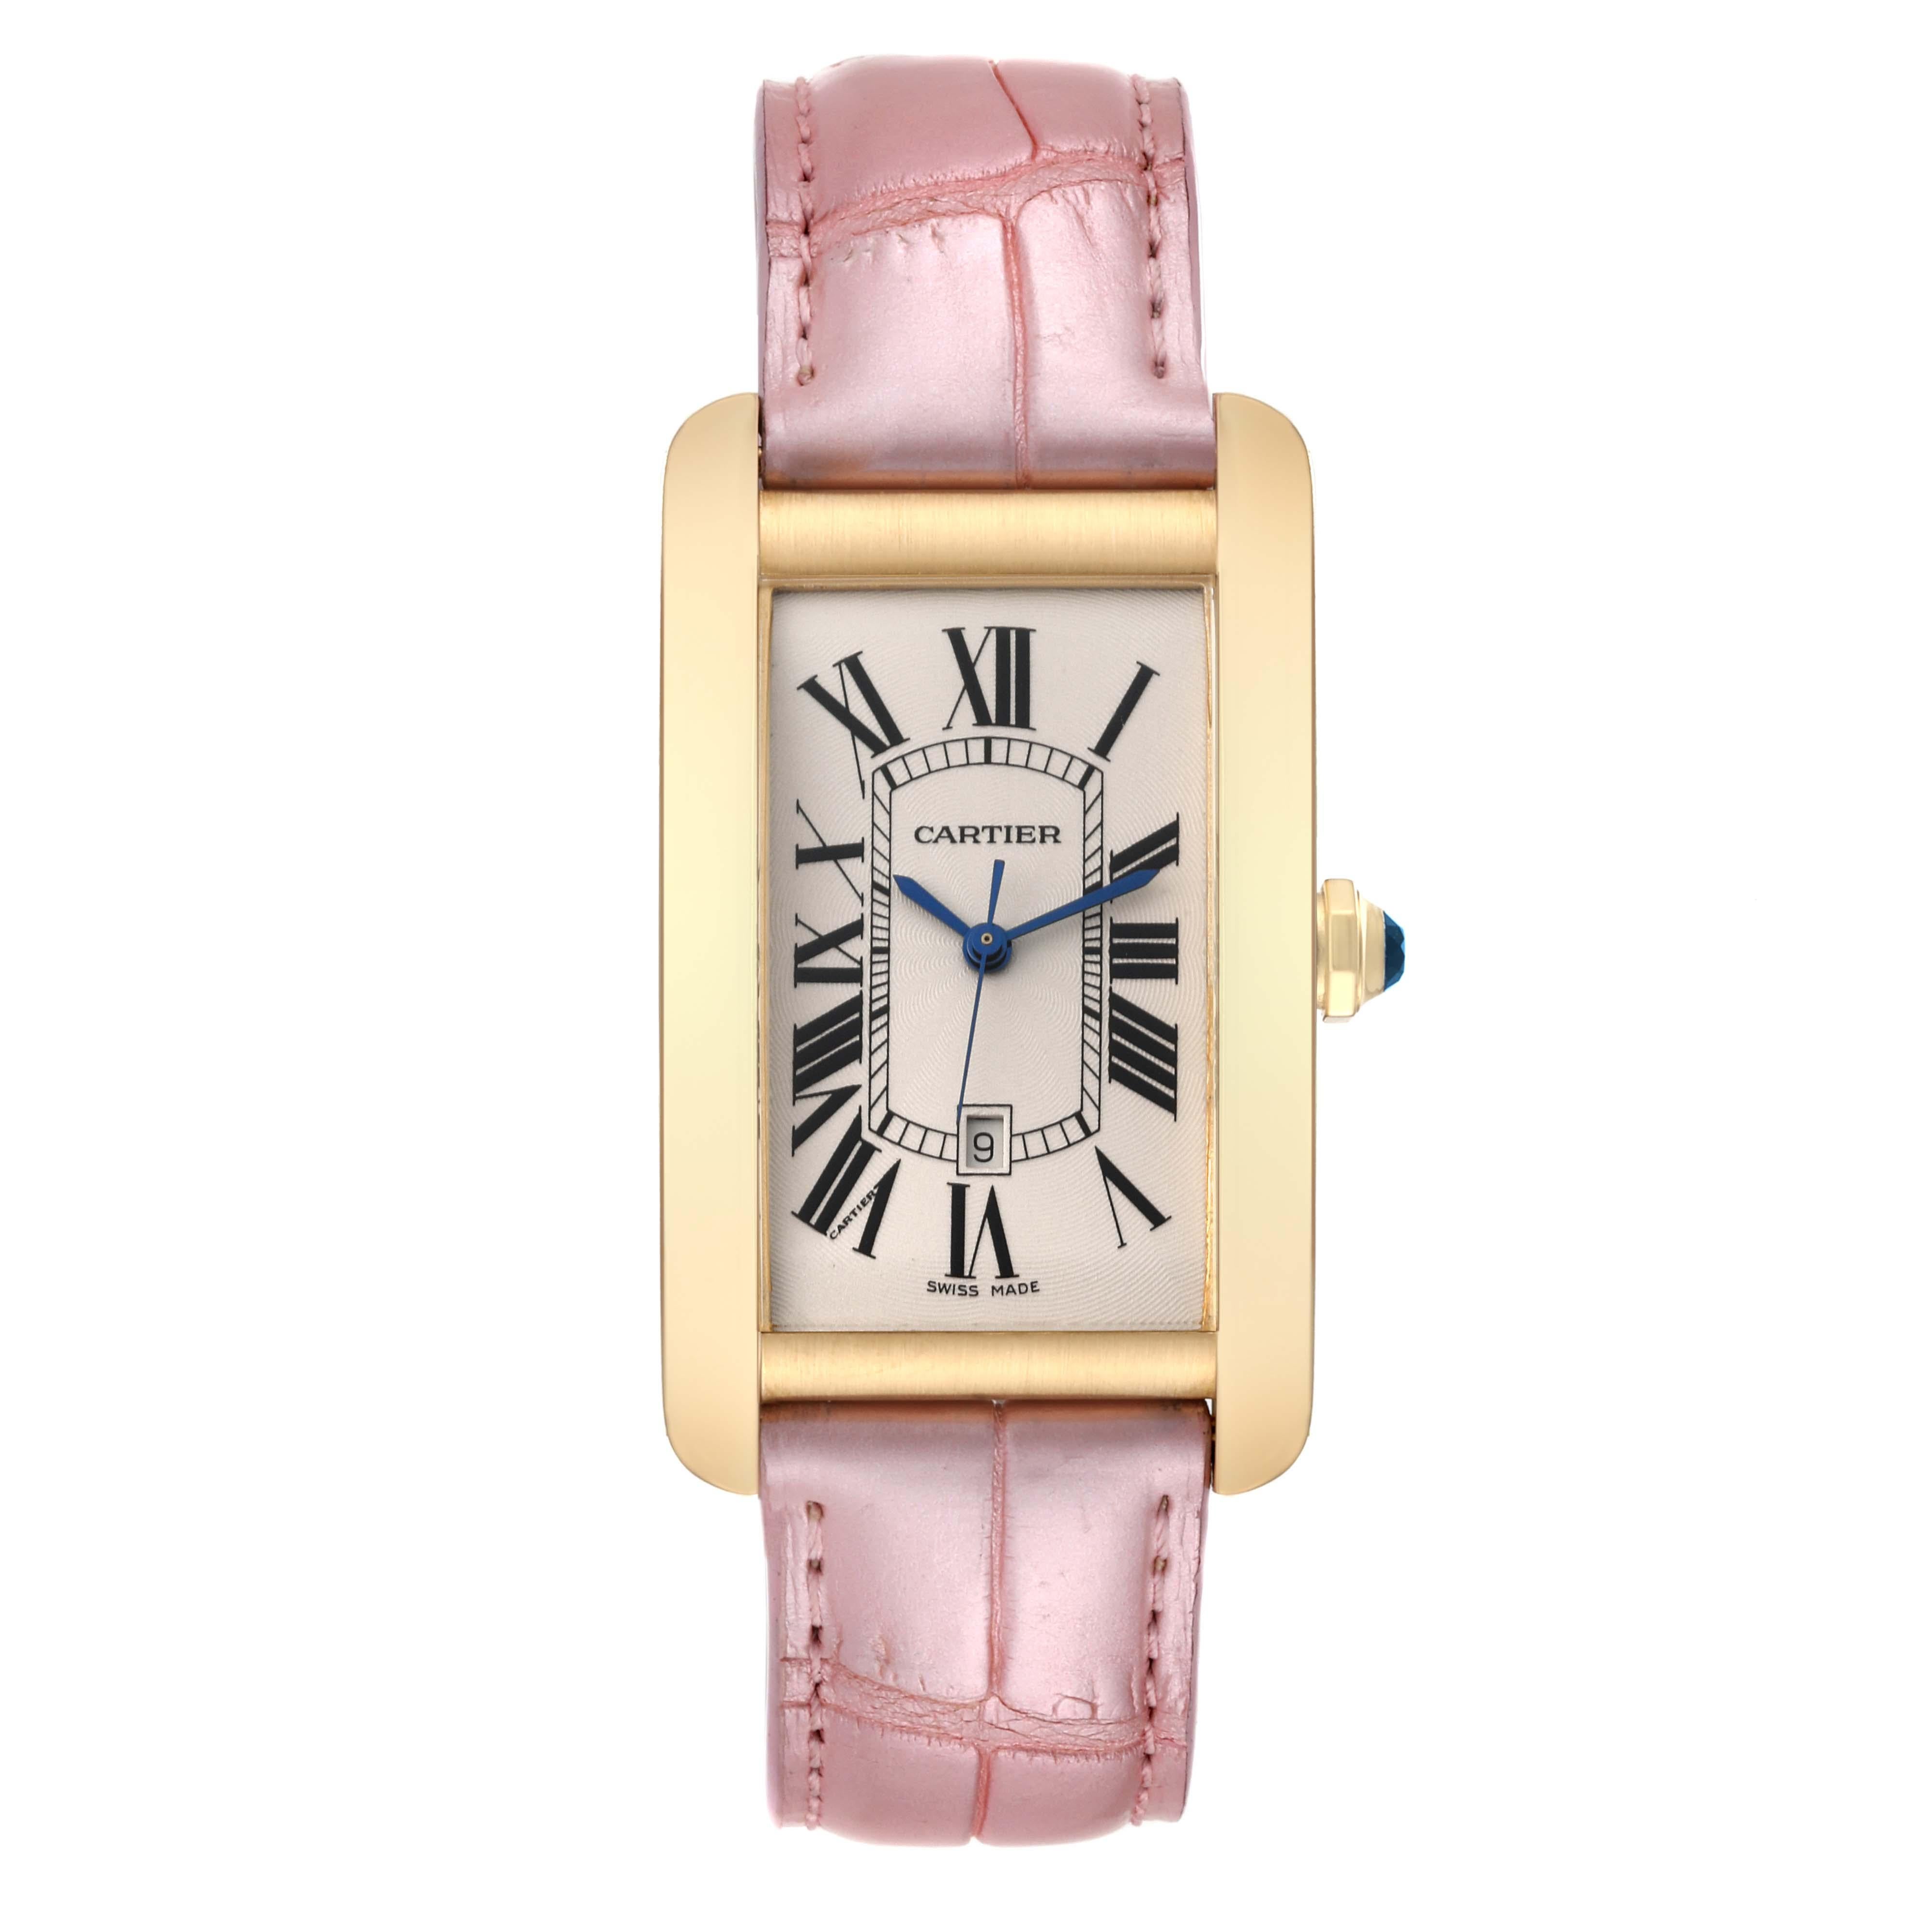 Cartier Tank Americaine Yellow Gold Automatic Mens Watch W2603156. Automatic self-winding movement. 18K yellow gold case 26.6 x 45.1 mm. Octagonal crown set with faceted blue sapphire. . Scratch resistant sapphire crystal. Silvered guilloche dial